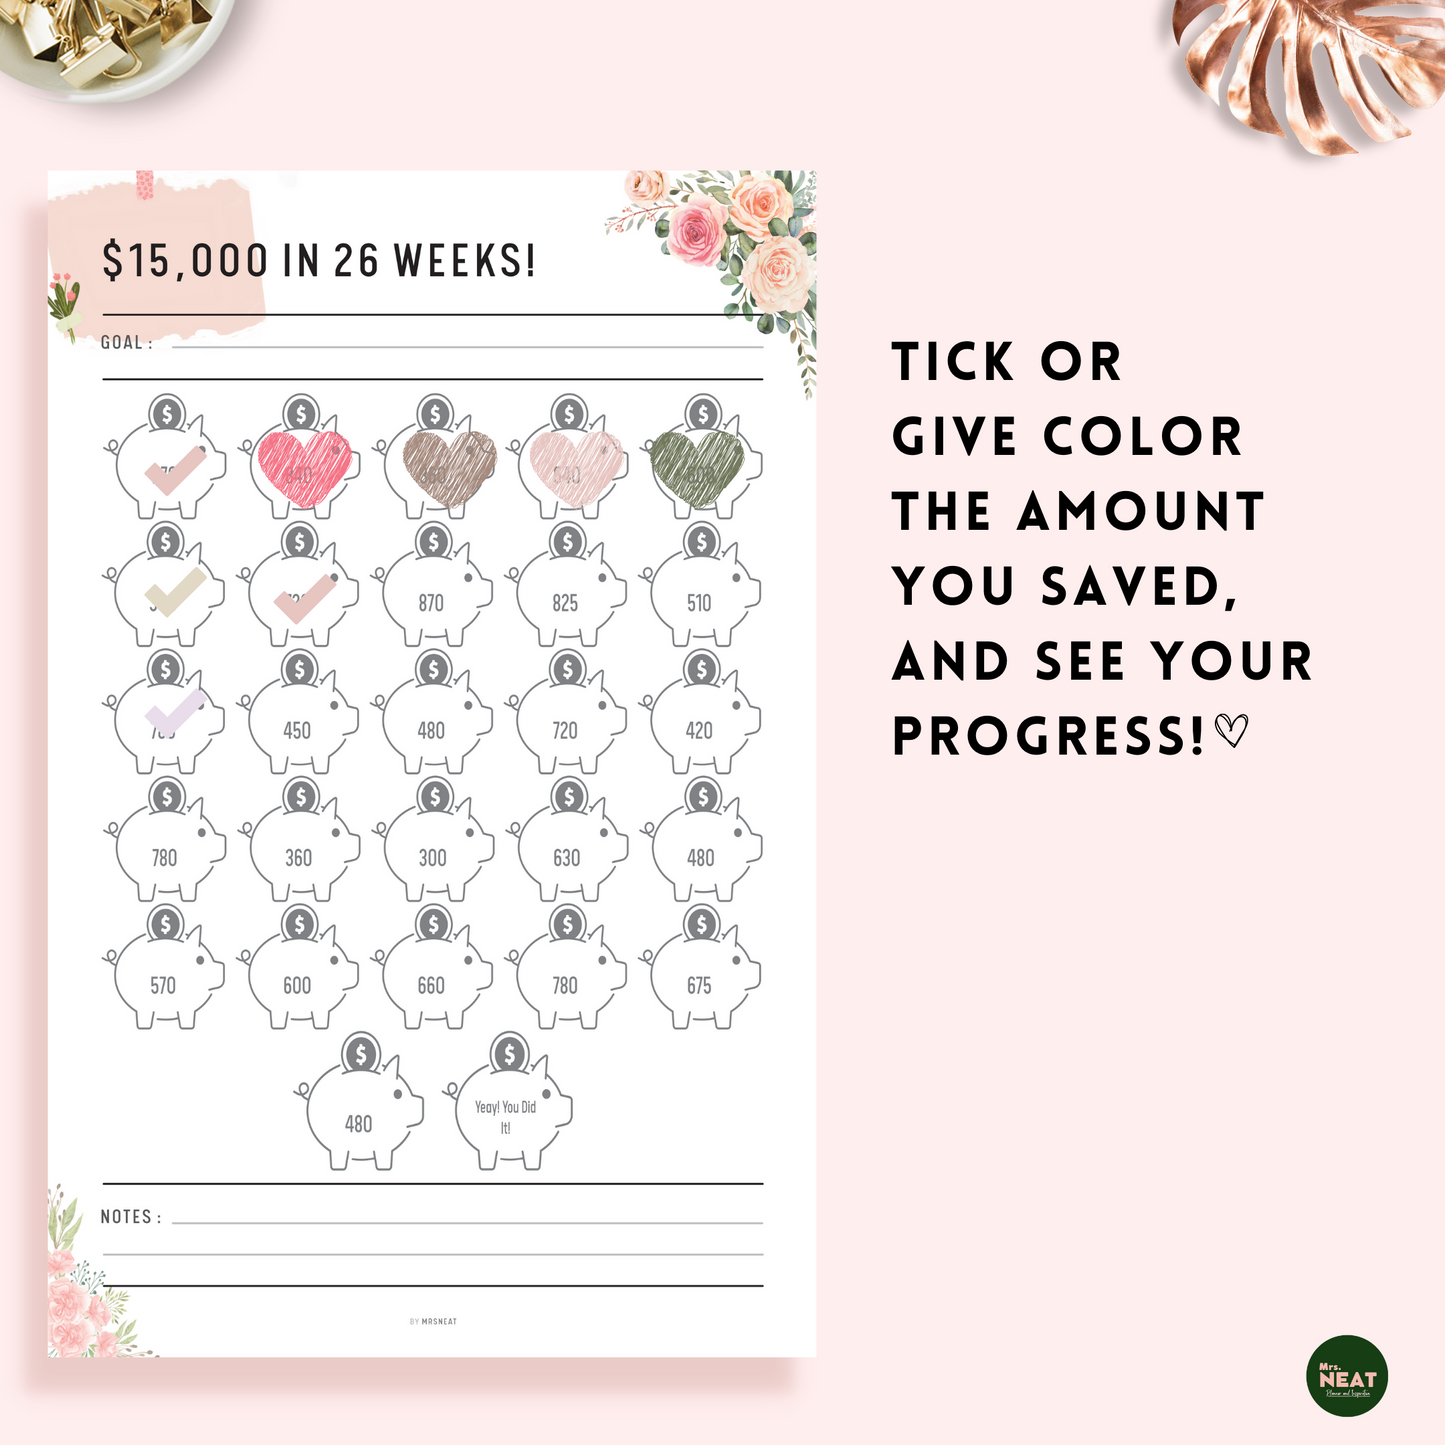 Tick up the amount you saved on this cute piggy bank saving challenge in Floral Theme and see your saving progress